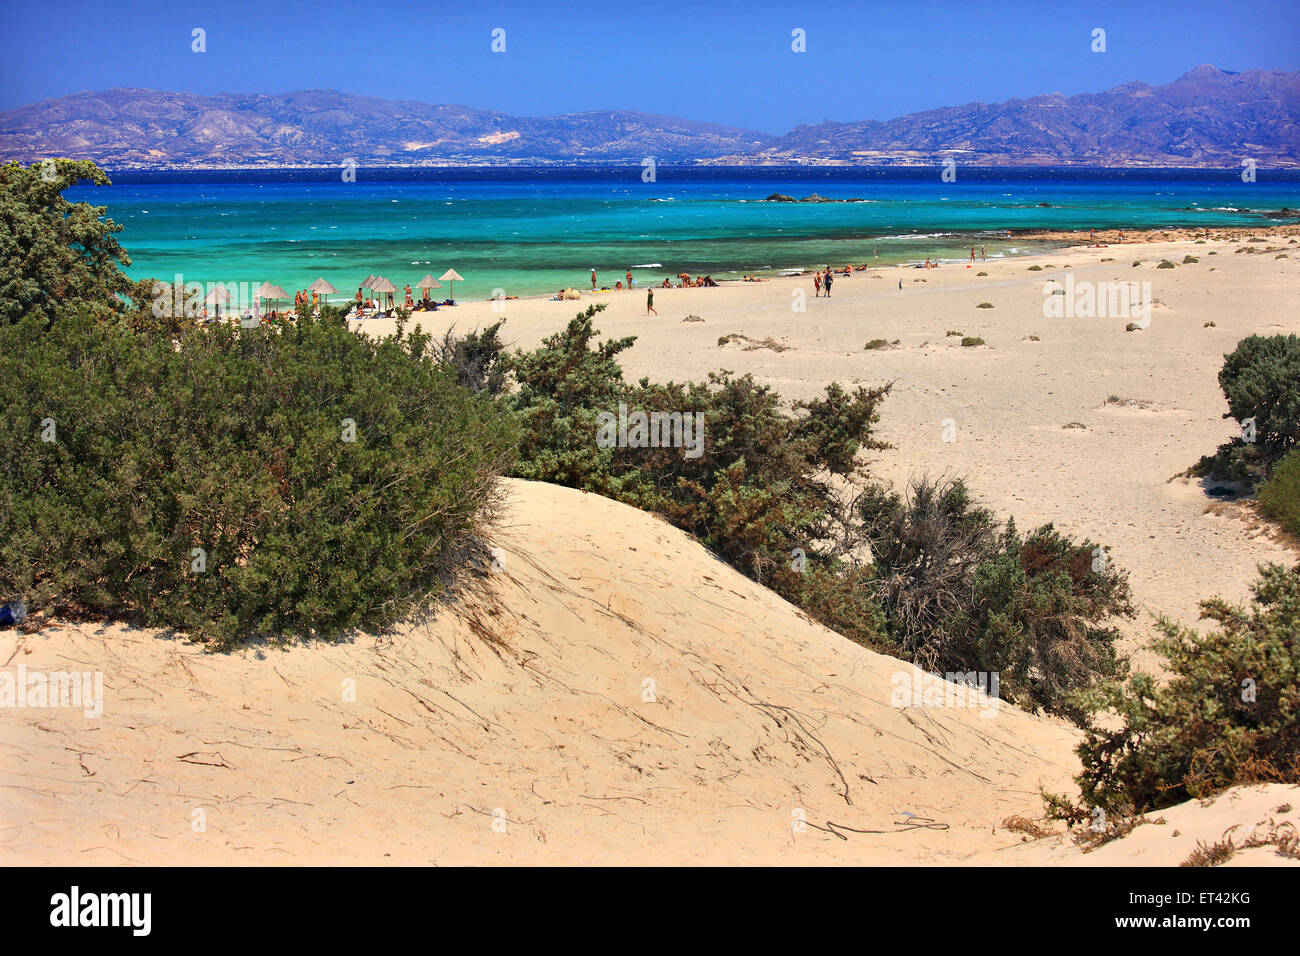 This is Chrissi  island, a small exotic island, a tiny paradise, 8 miles south of  Ierapetra, Lasithi, Crete, Greece Stock Photo